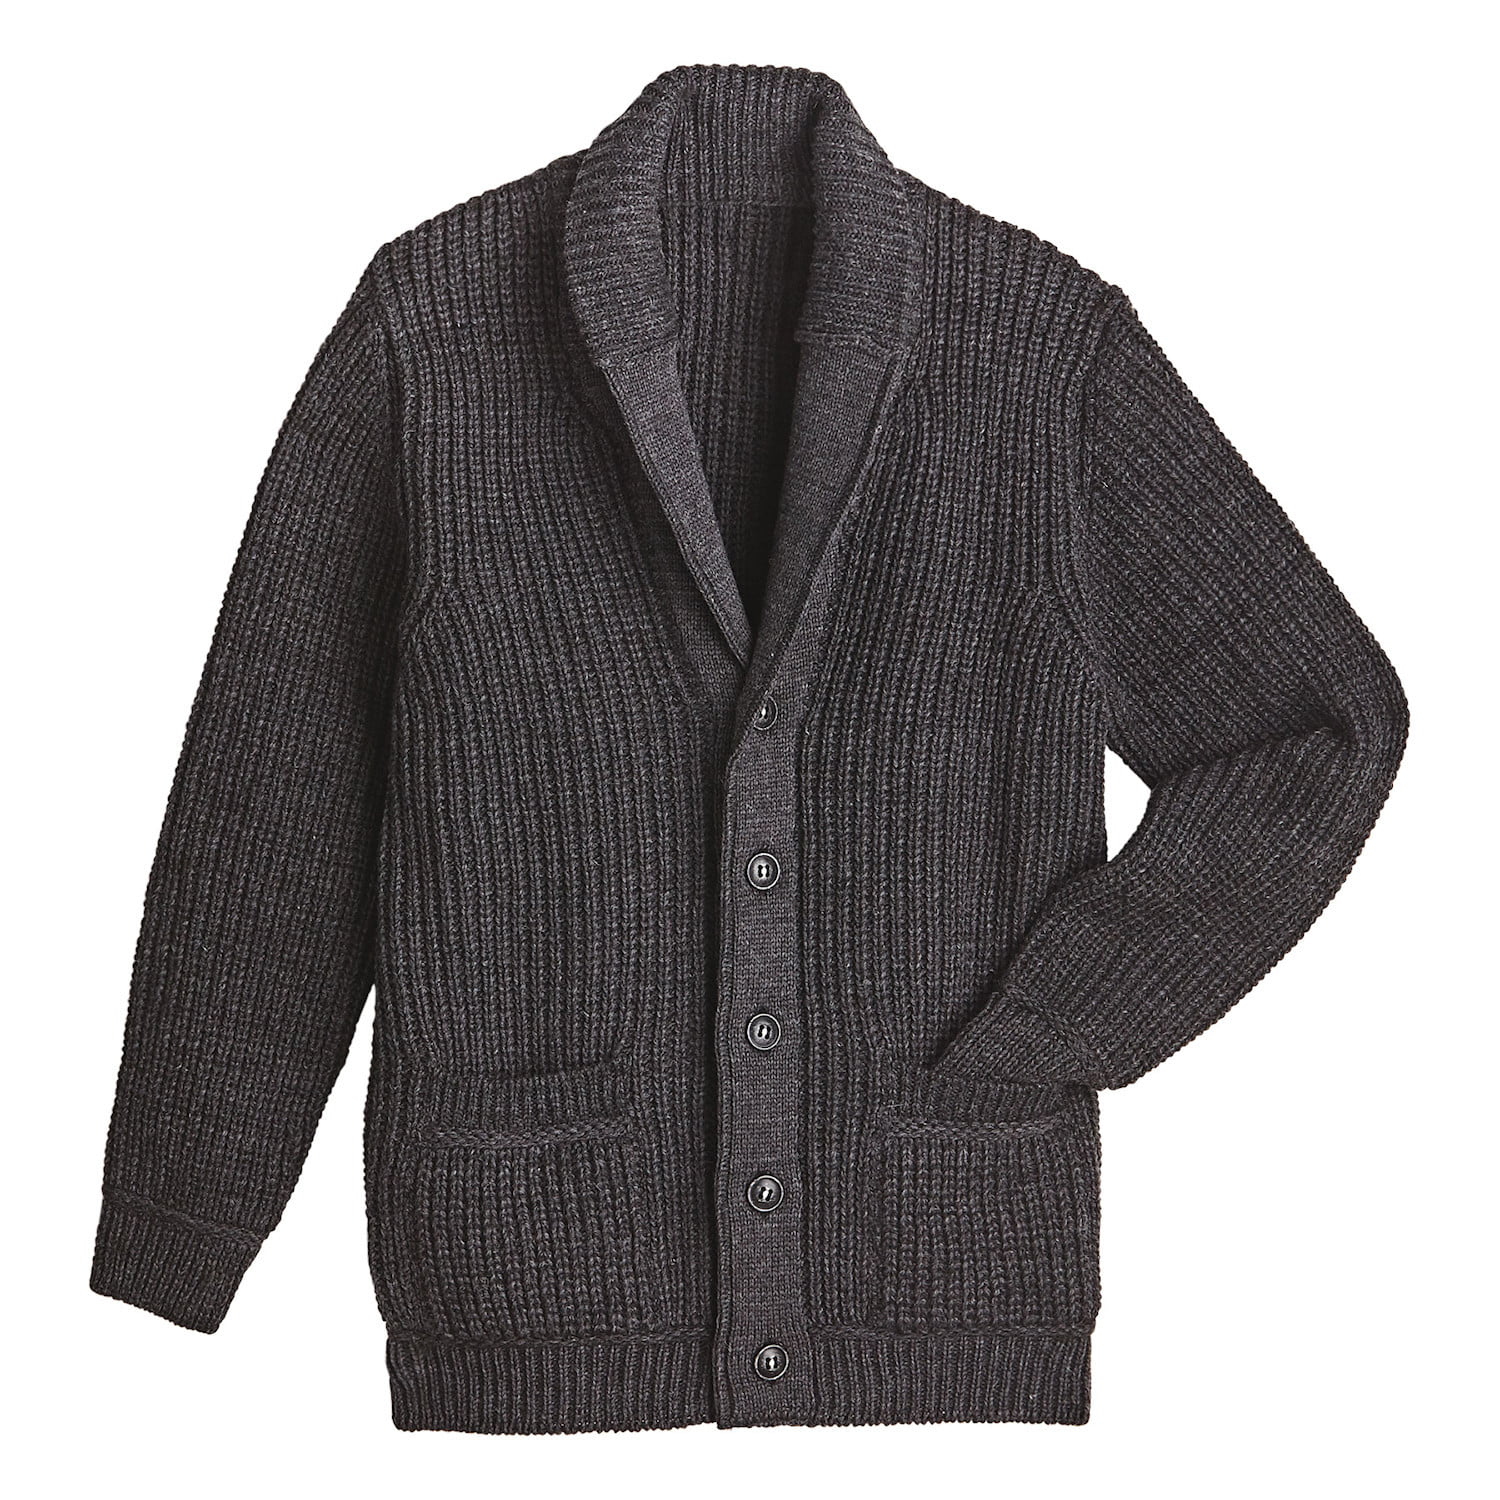 West End Two Tone Ribbed Wool Shawl Collar Cardigan Small, Charcoal